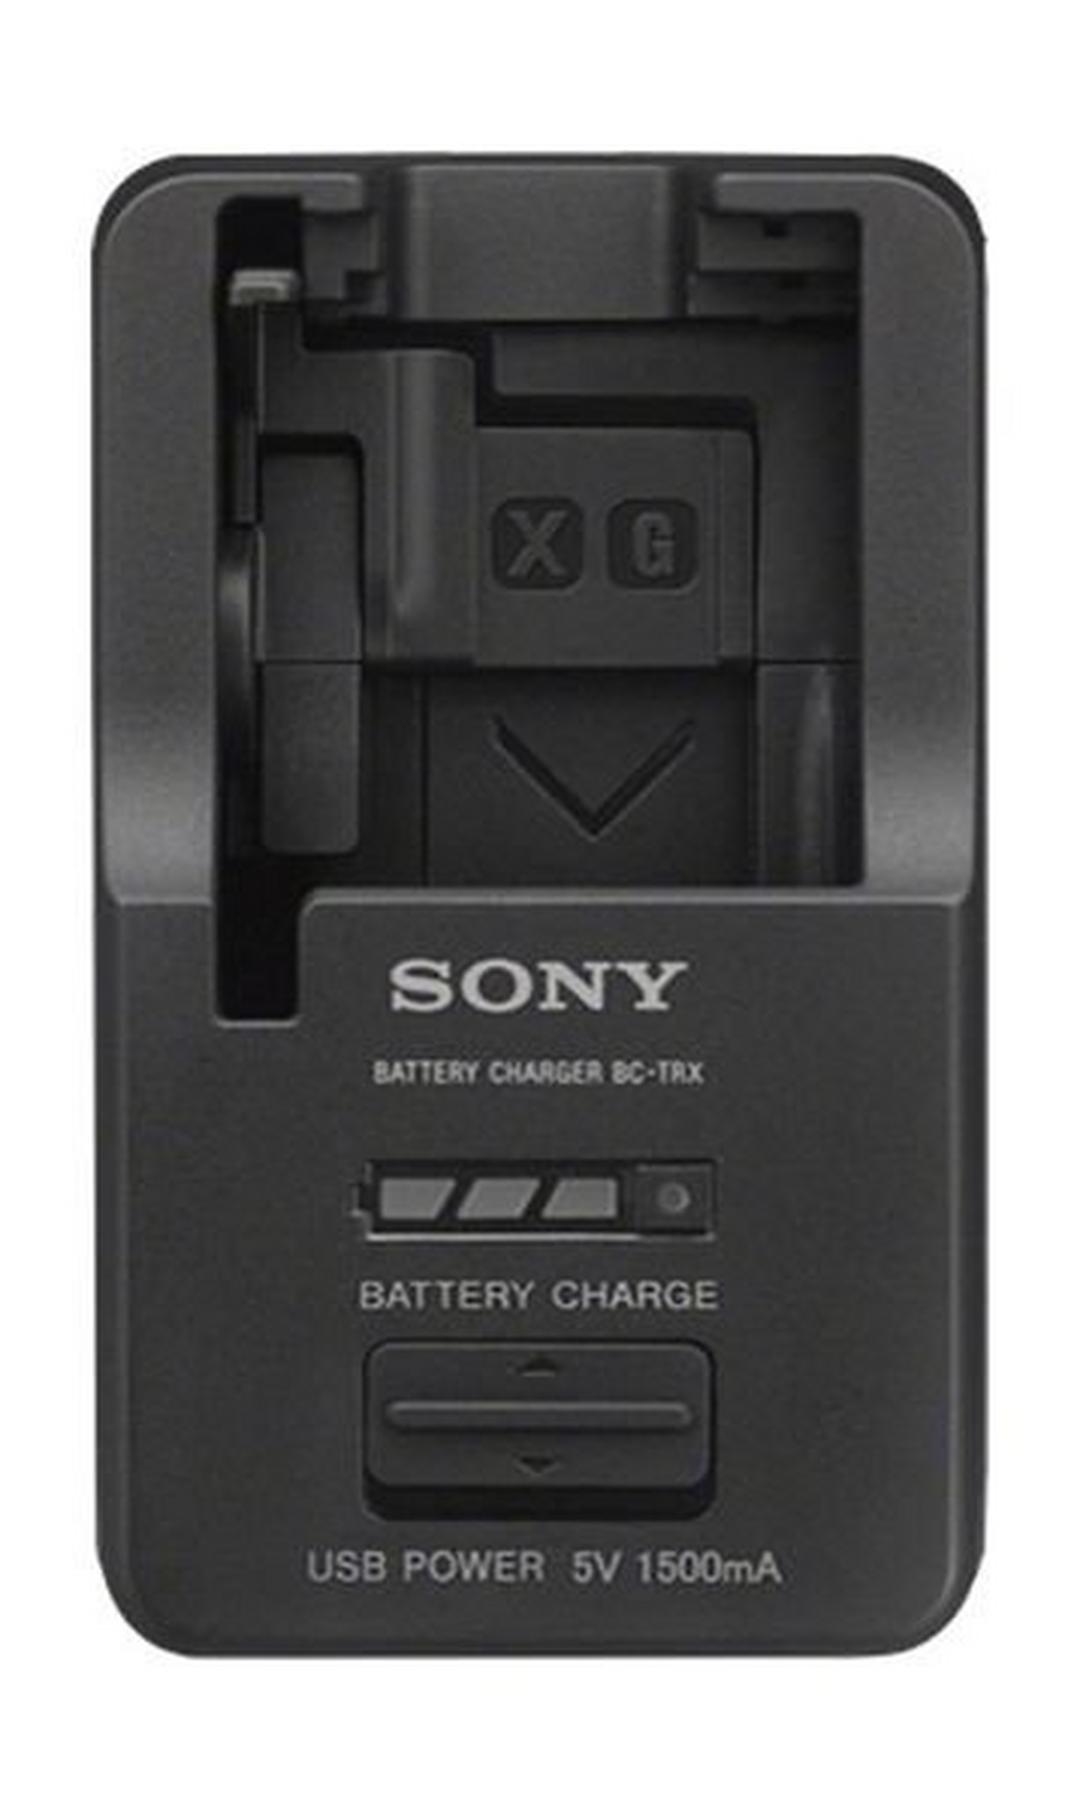 Sony Camera Portable Charger (BCTRX) - Black